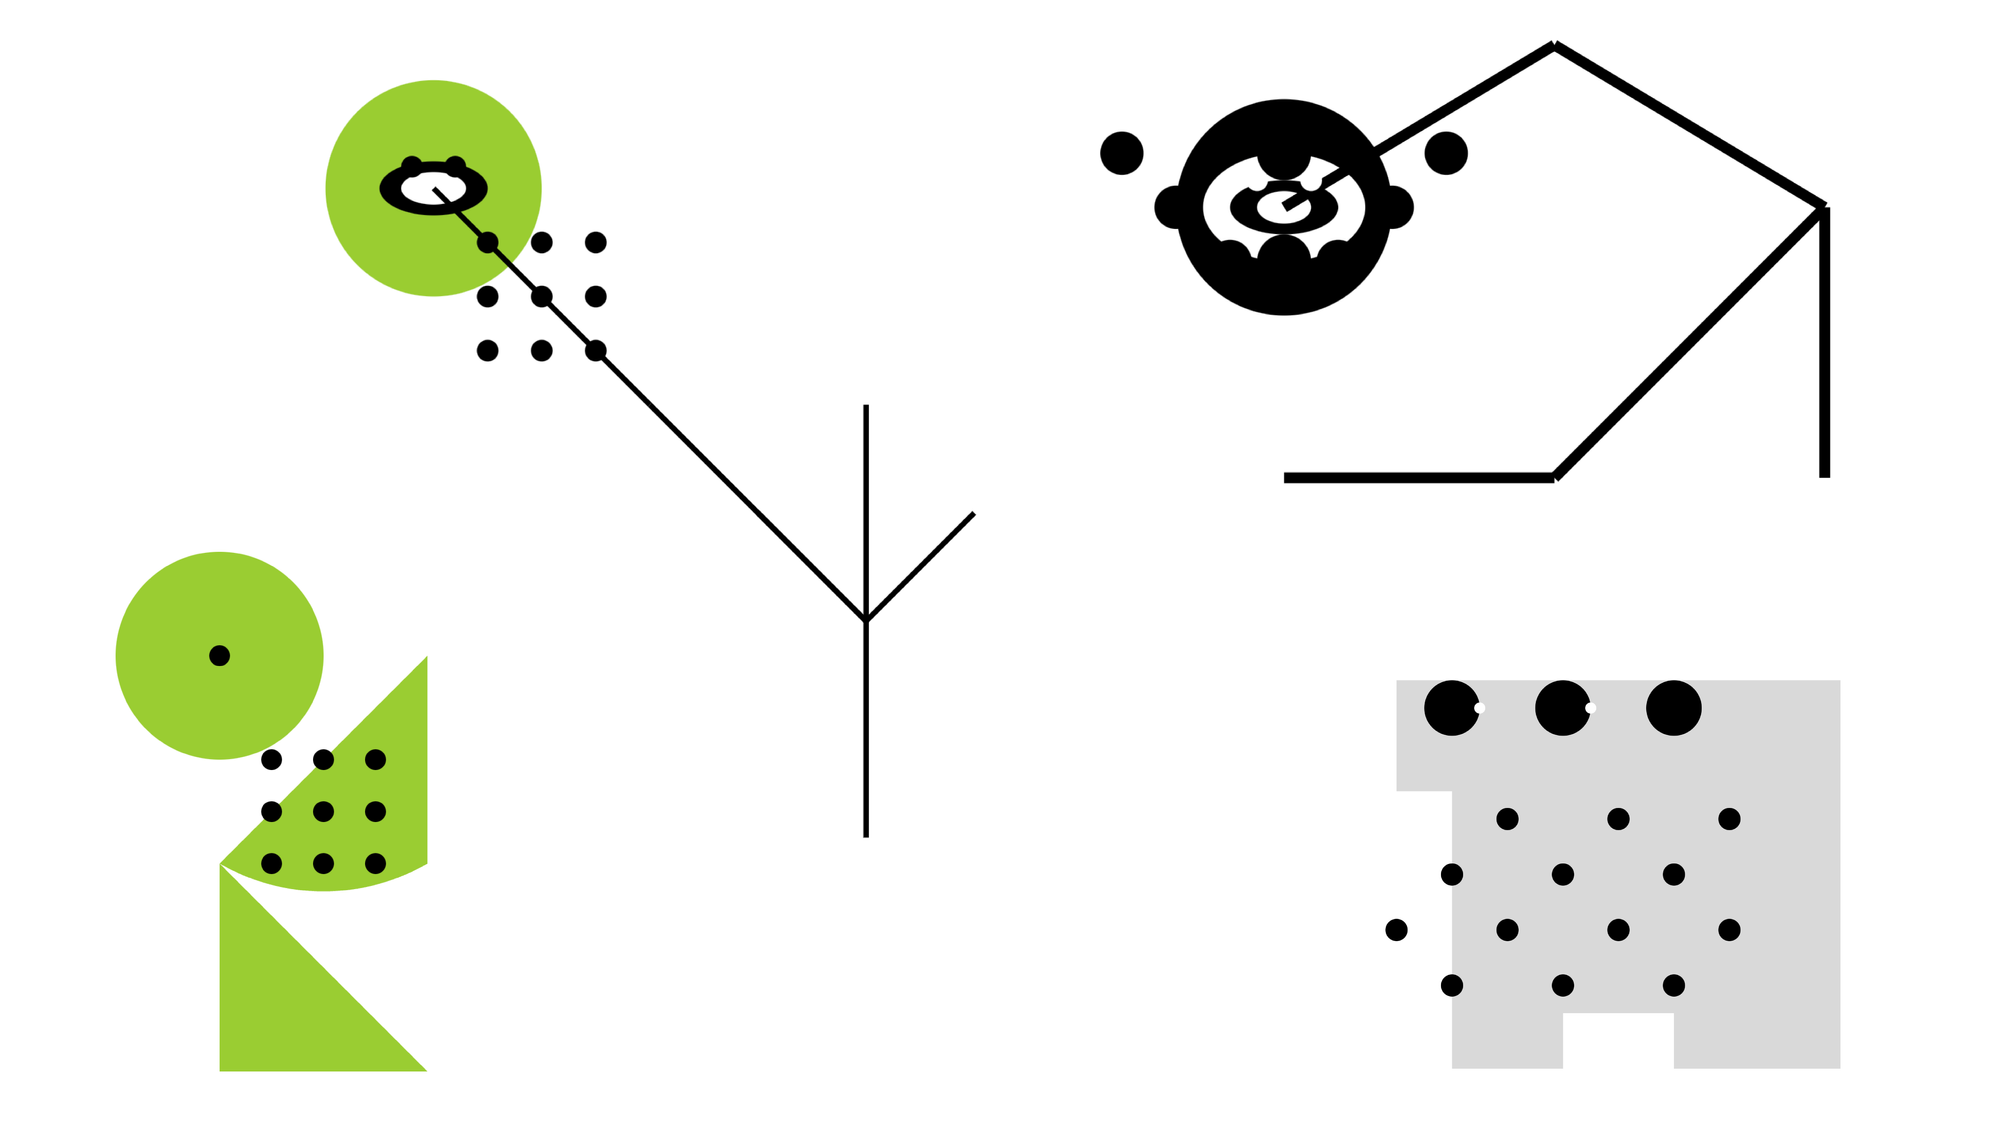 Four angular spotted shapes in green, black, and grey. Two might have froglike gaping mouths on their long stick necks, while the other two are even more abstract.